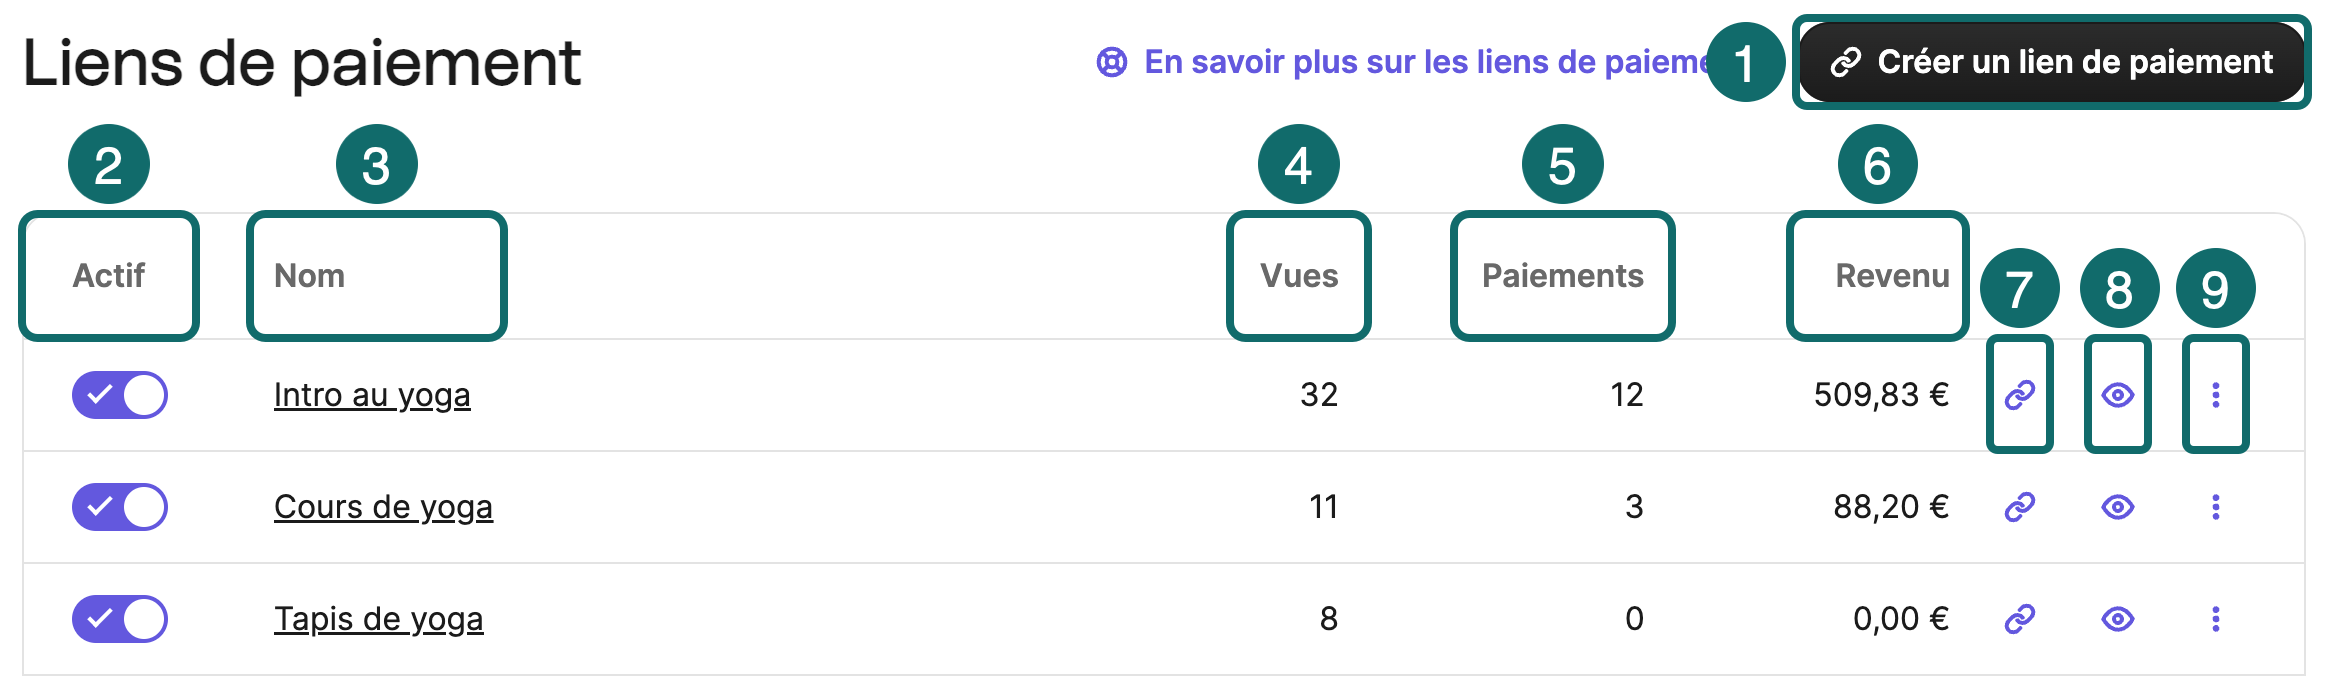 payments_links-dashboard_FR.png